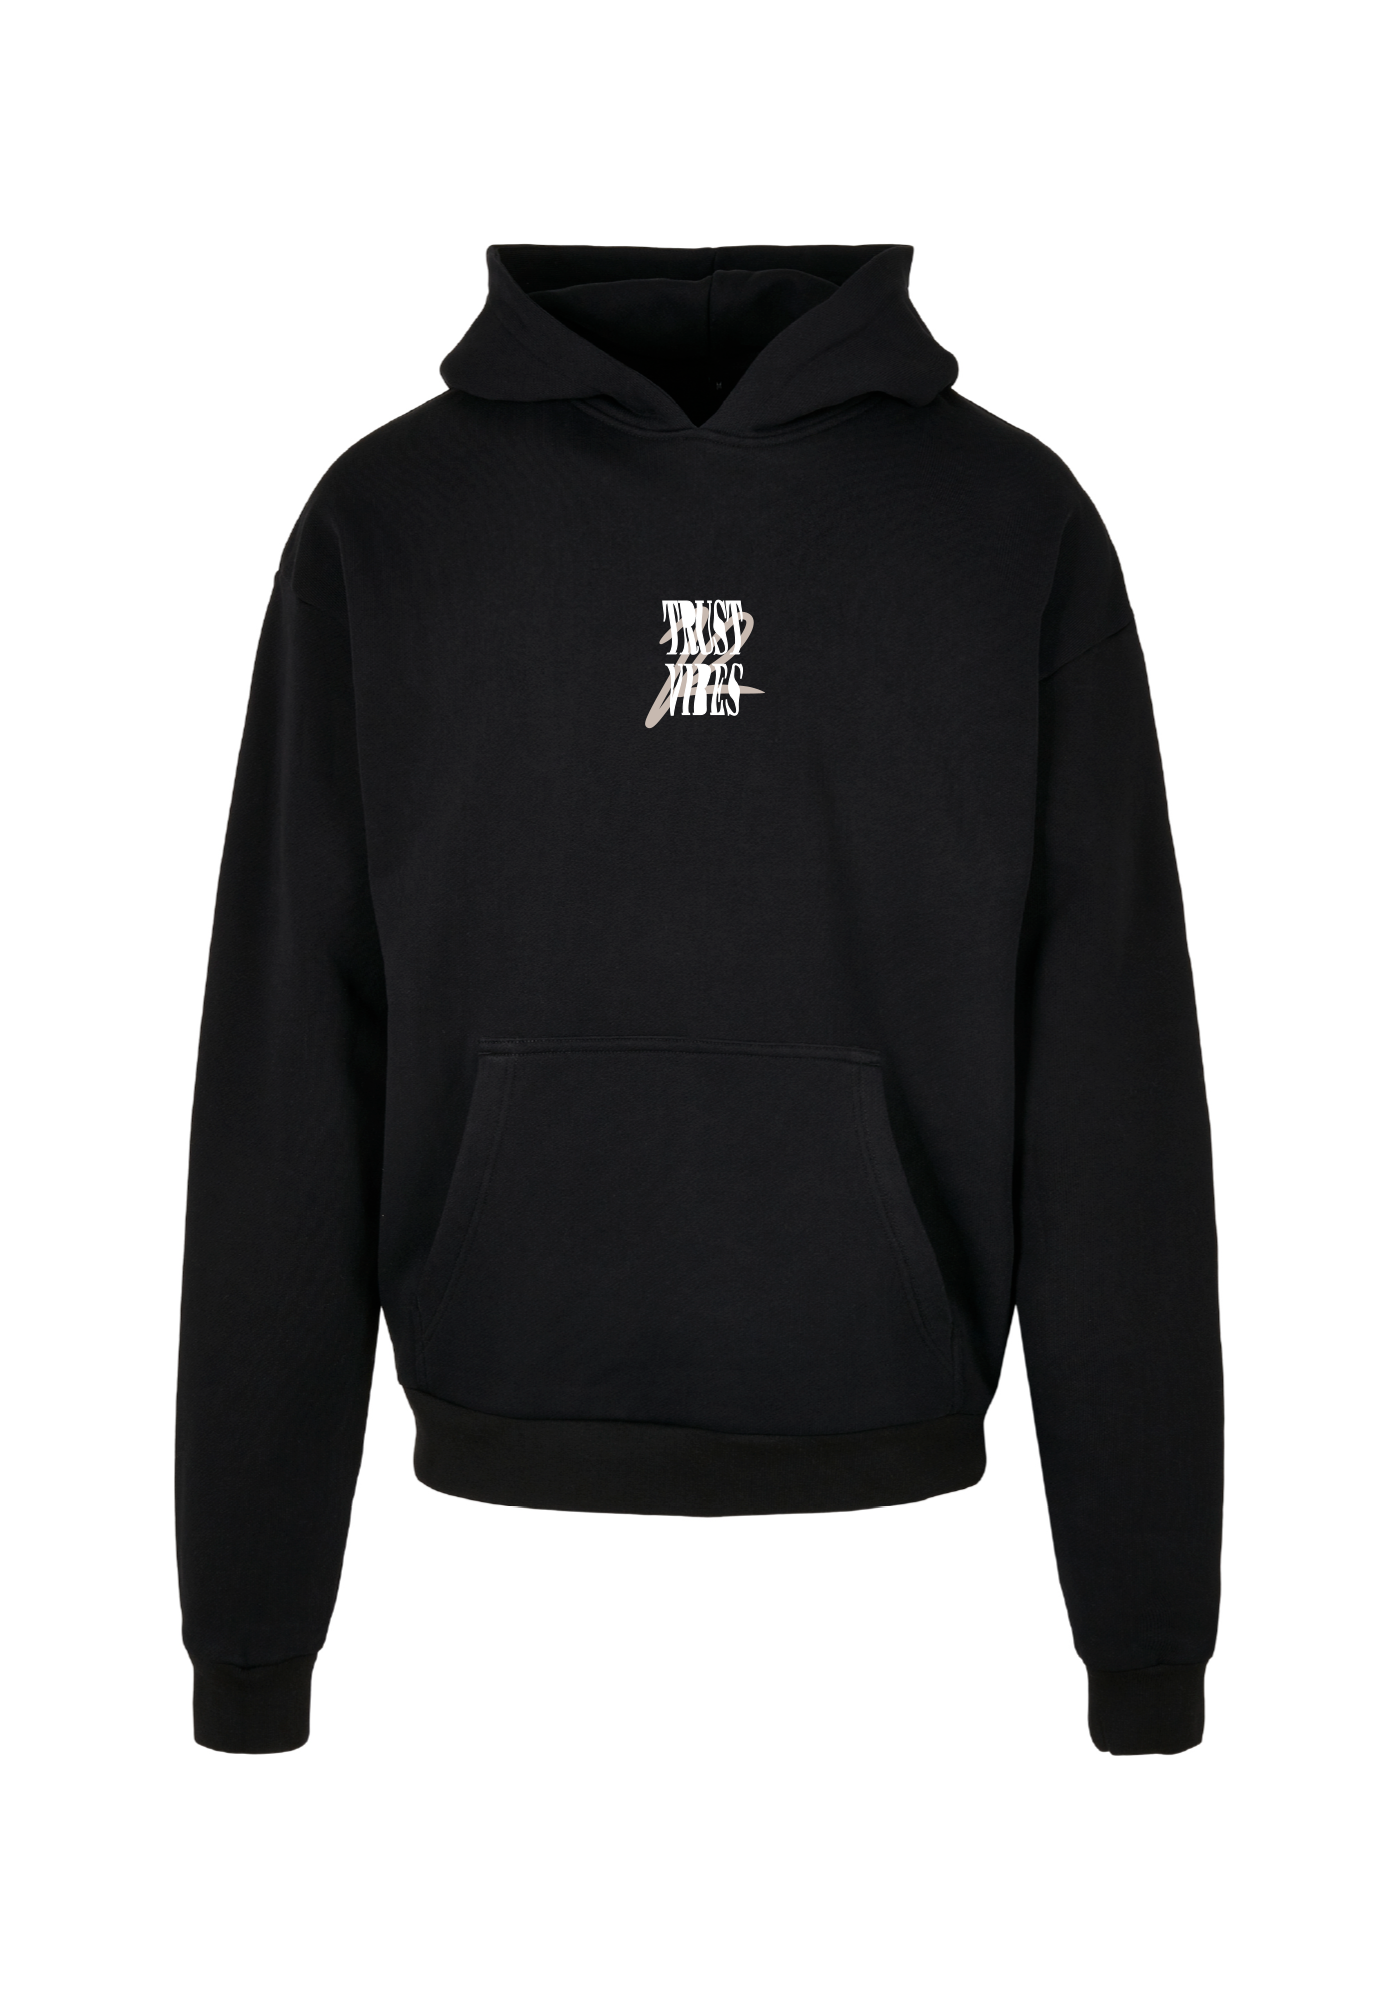 Oversized Heavy Hoodie "The Truth"